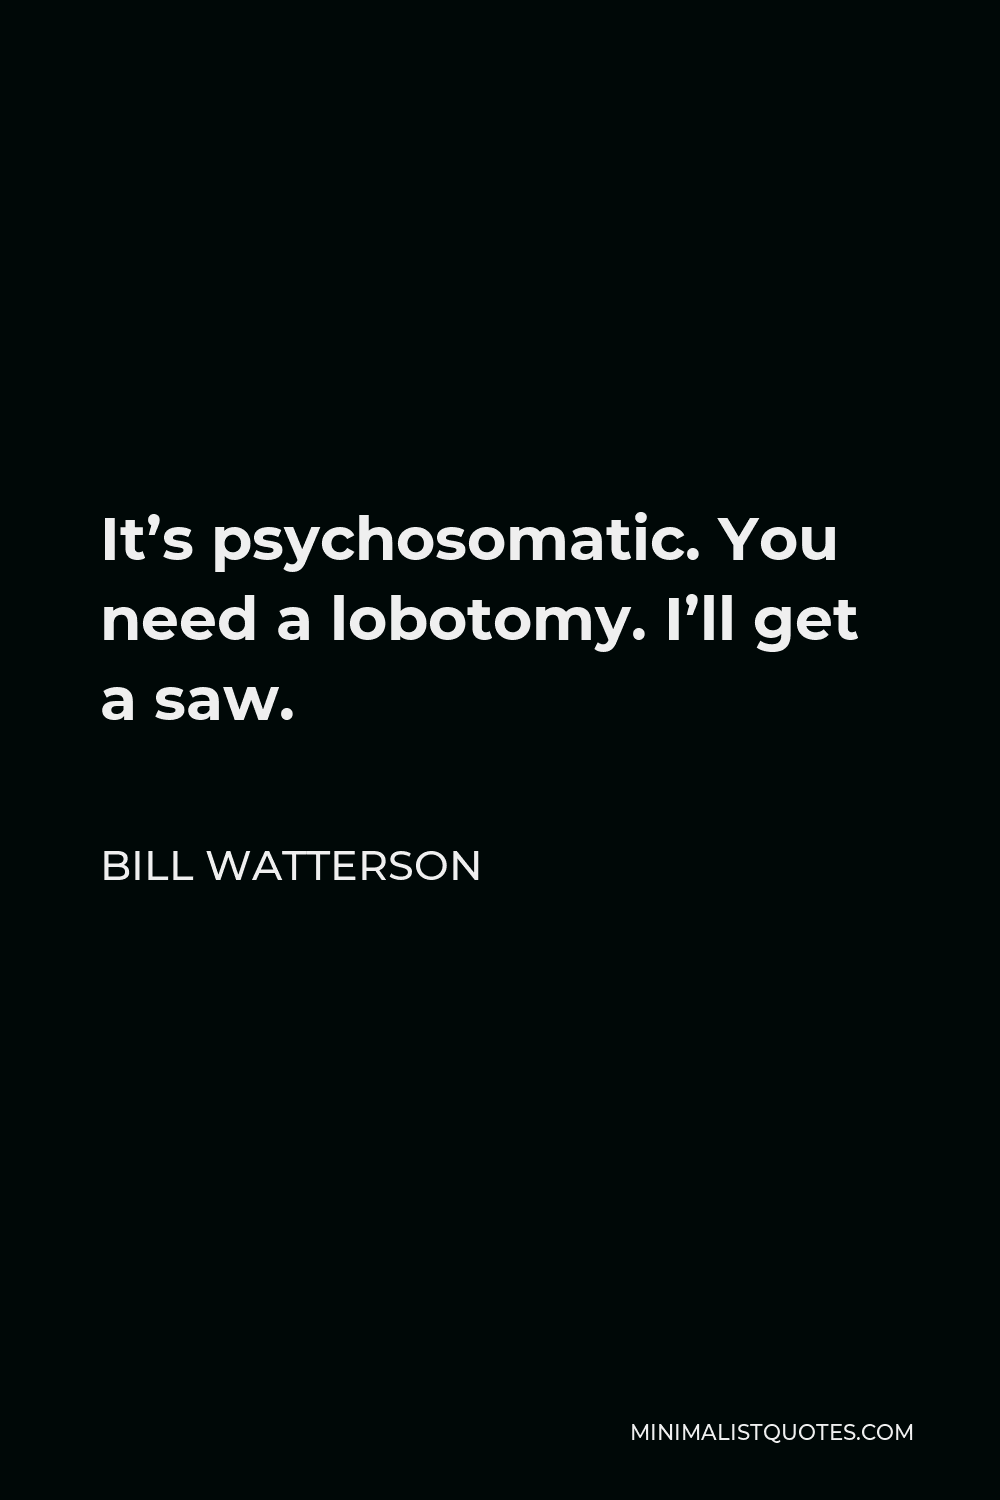 Bill Watterson Quote - It’s psychosomatic. You need a lobotomy. I’ll get a saw.